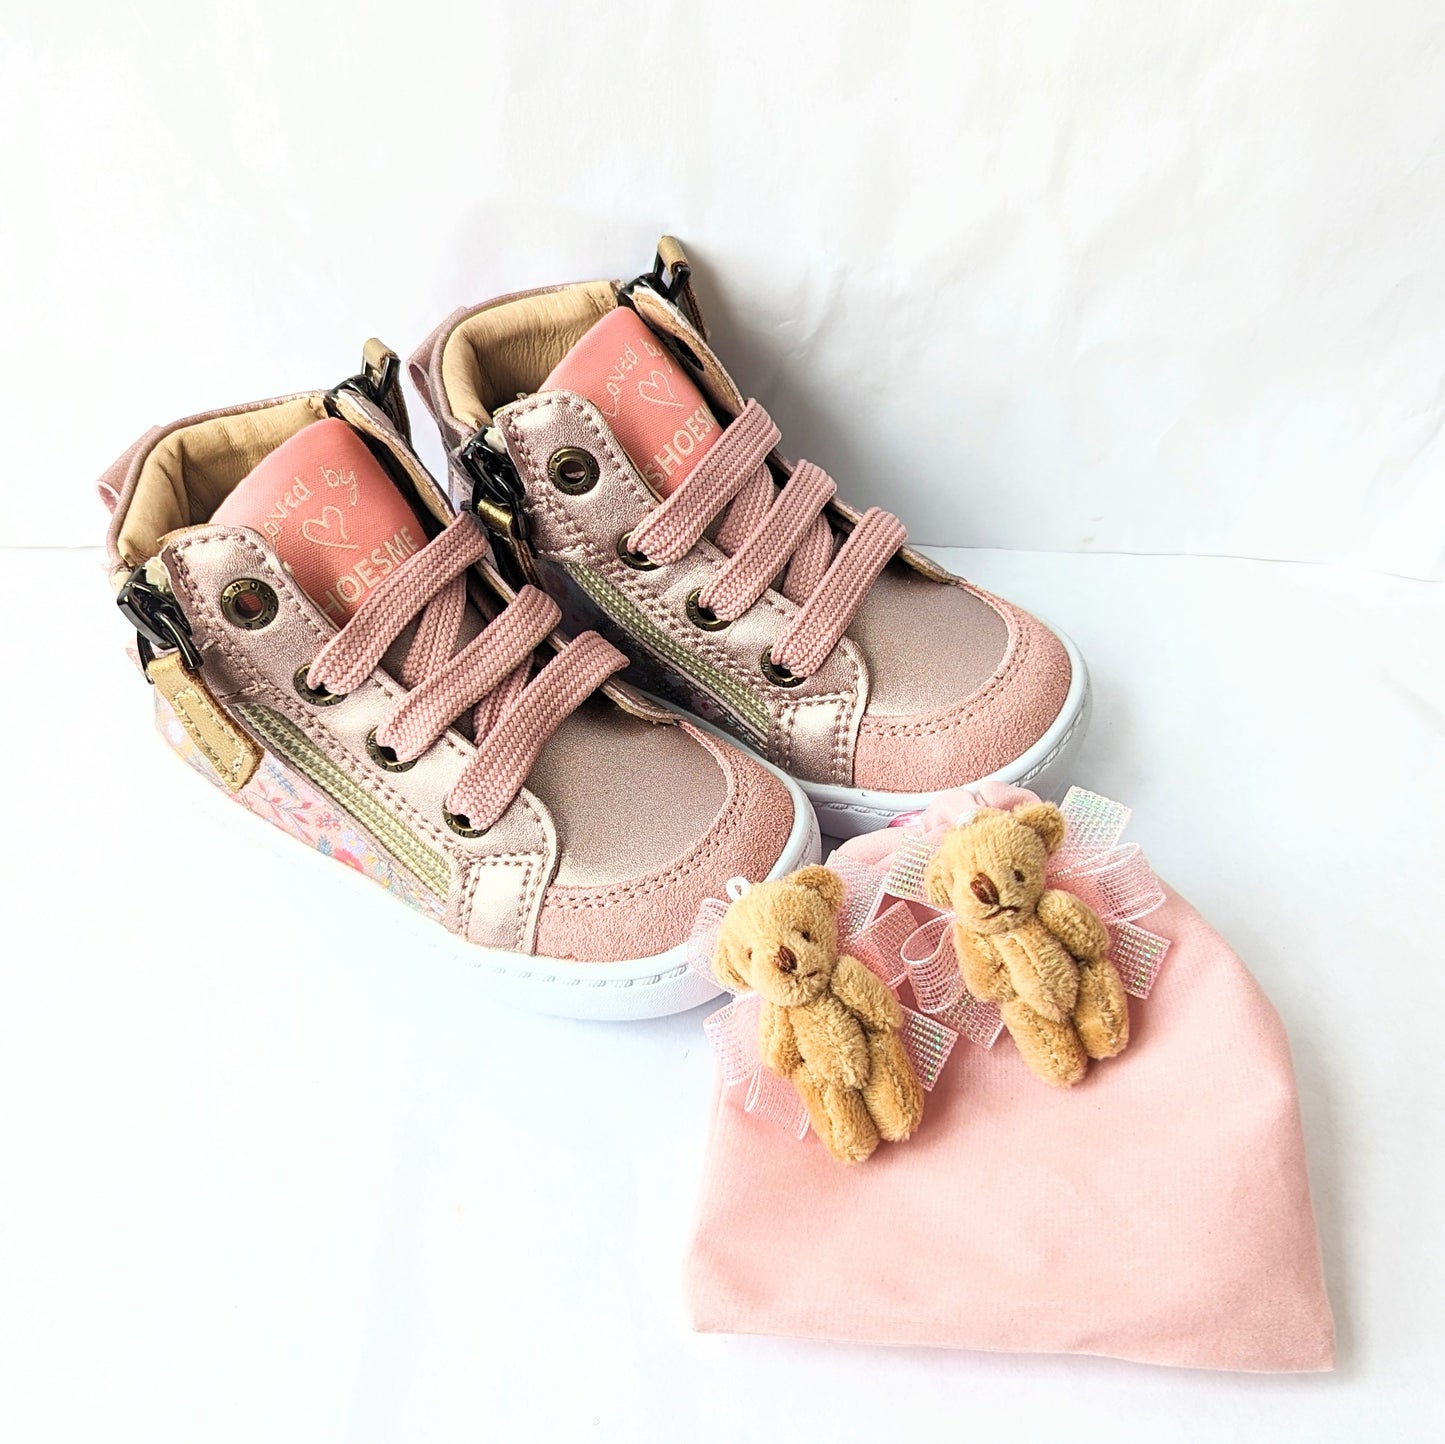 A pair of girls hi-top boots by Shoesme, style FL23W008-B, in rose gold floral leather and suede with detachable teddy bears and lace and zip fastening. Angled view of pair with detachable teddies and pink drawstring bag. Angled view.